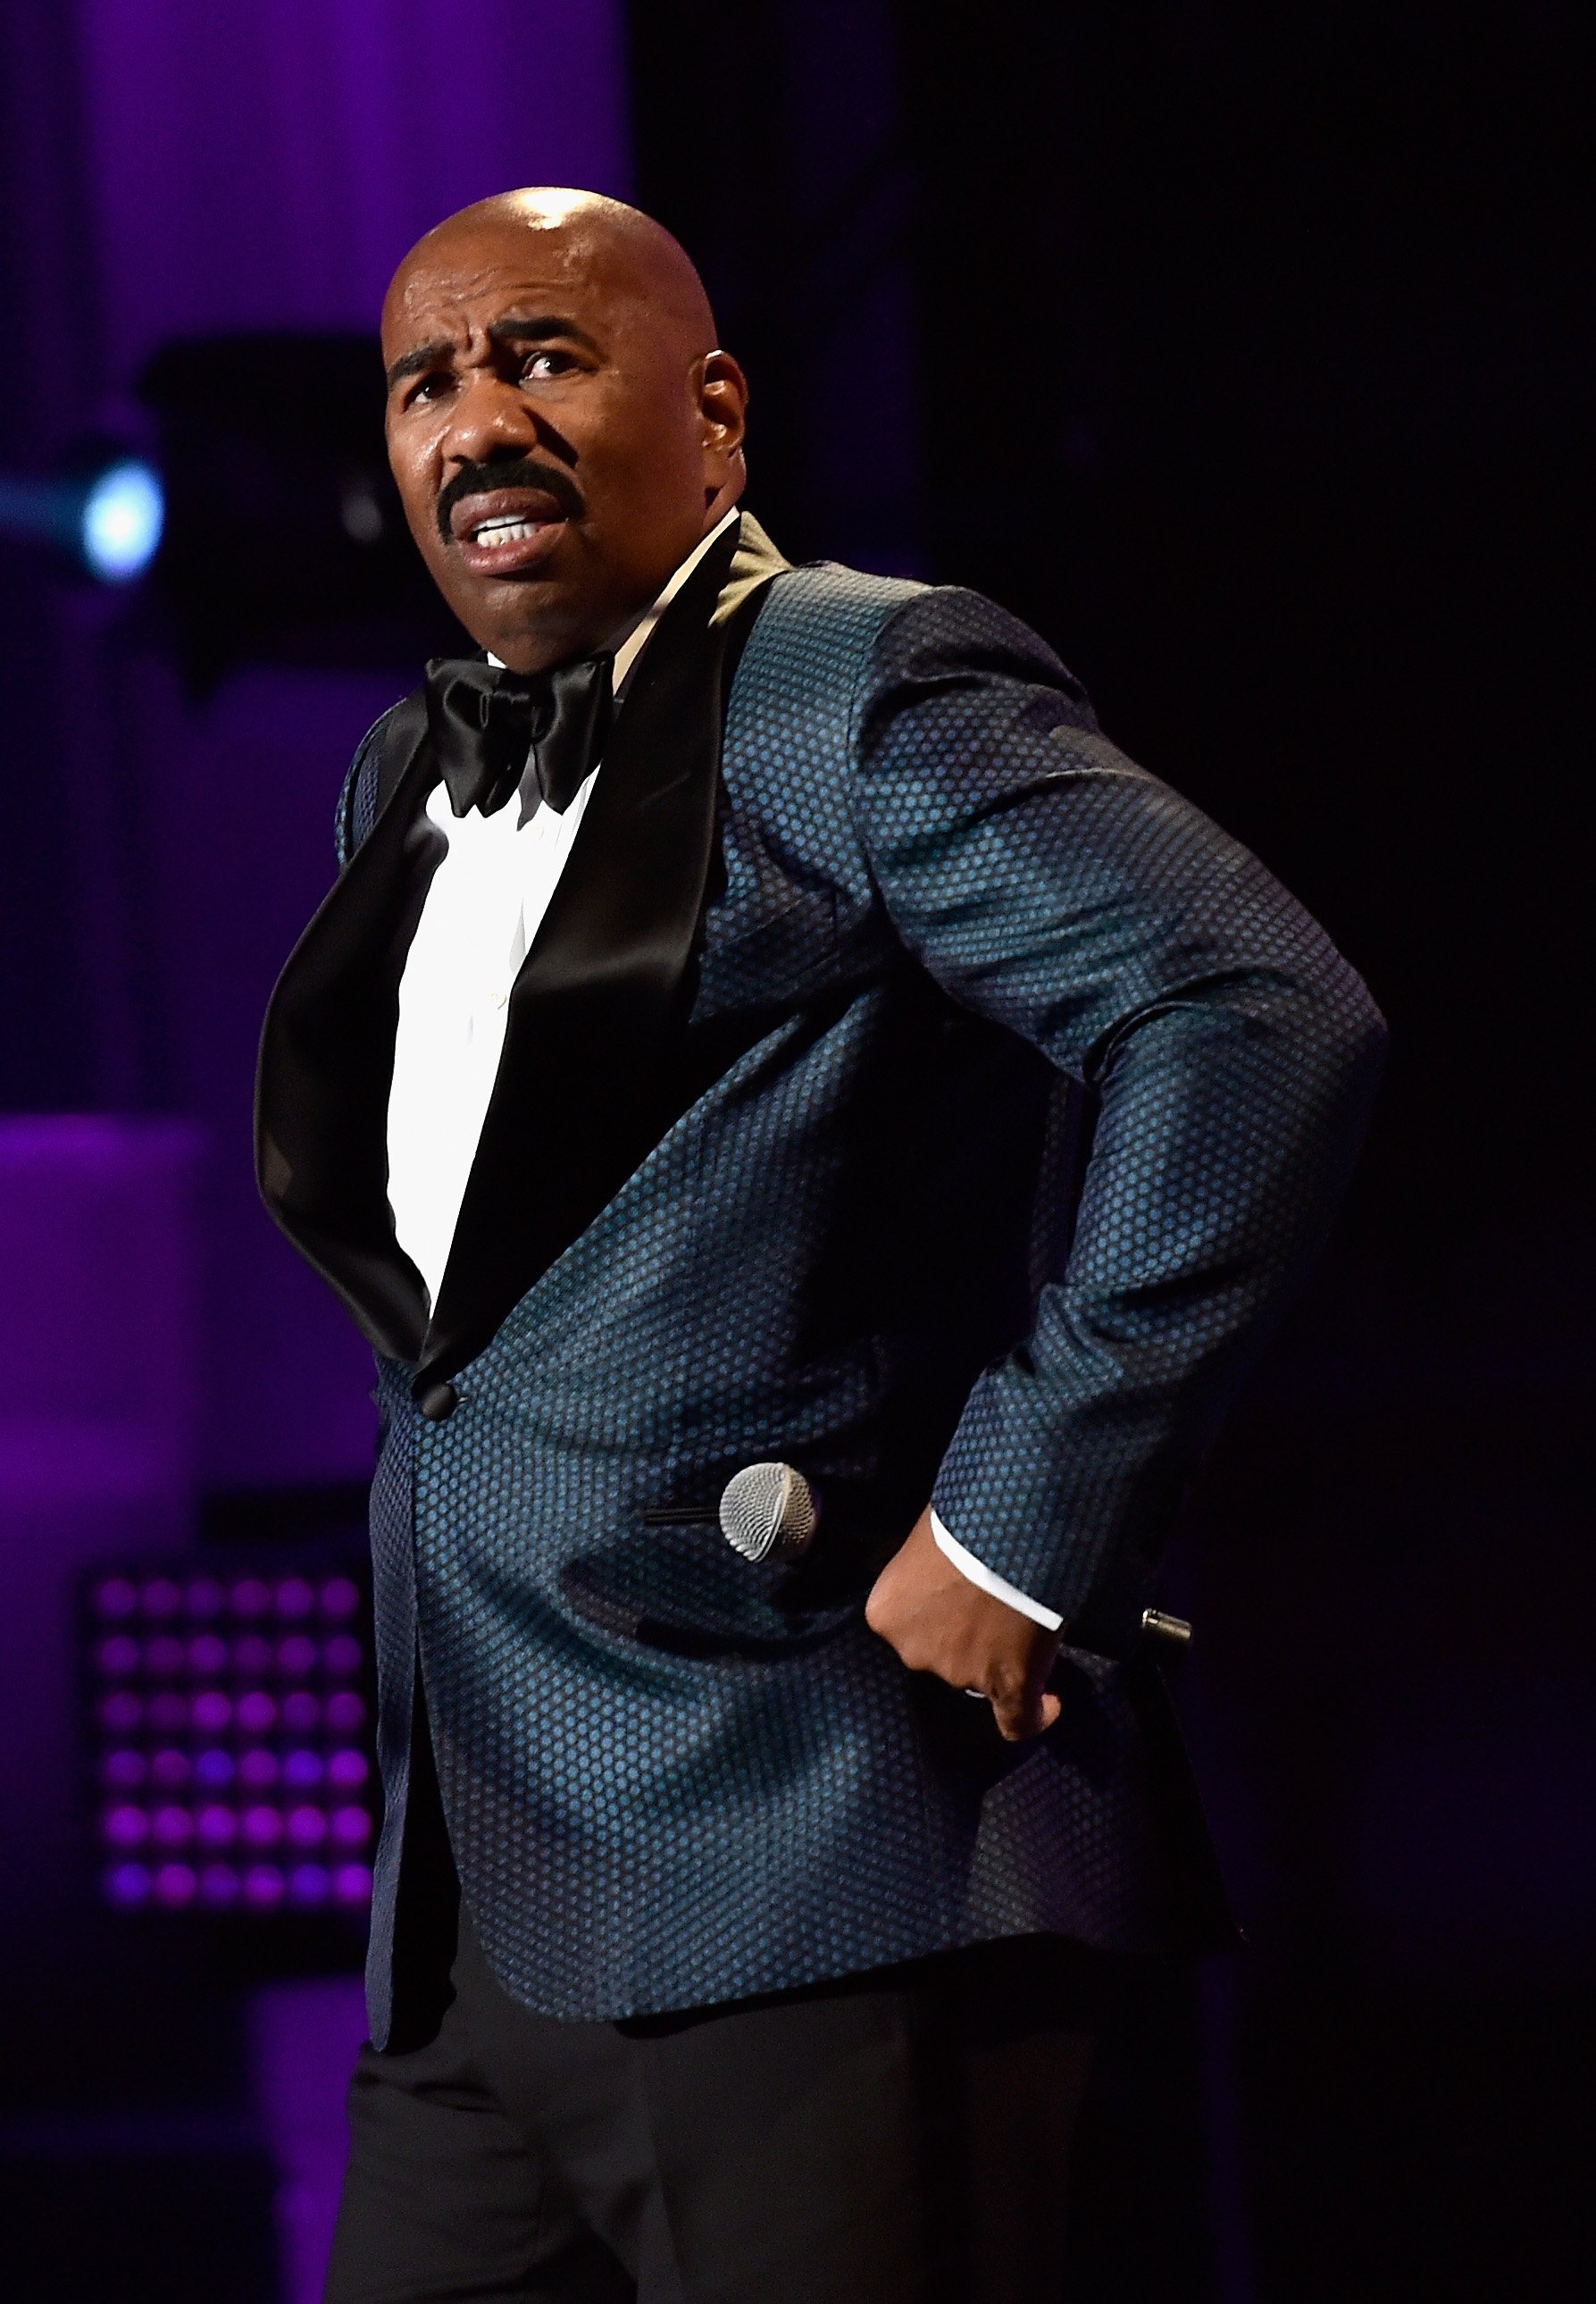 Steve Harvey as host at the 2016 Neighborhood Awards at the Mandalay Bay Events Center on July 23, 2016 in Las Vegas, Nevada. | Source: Getty